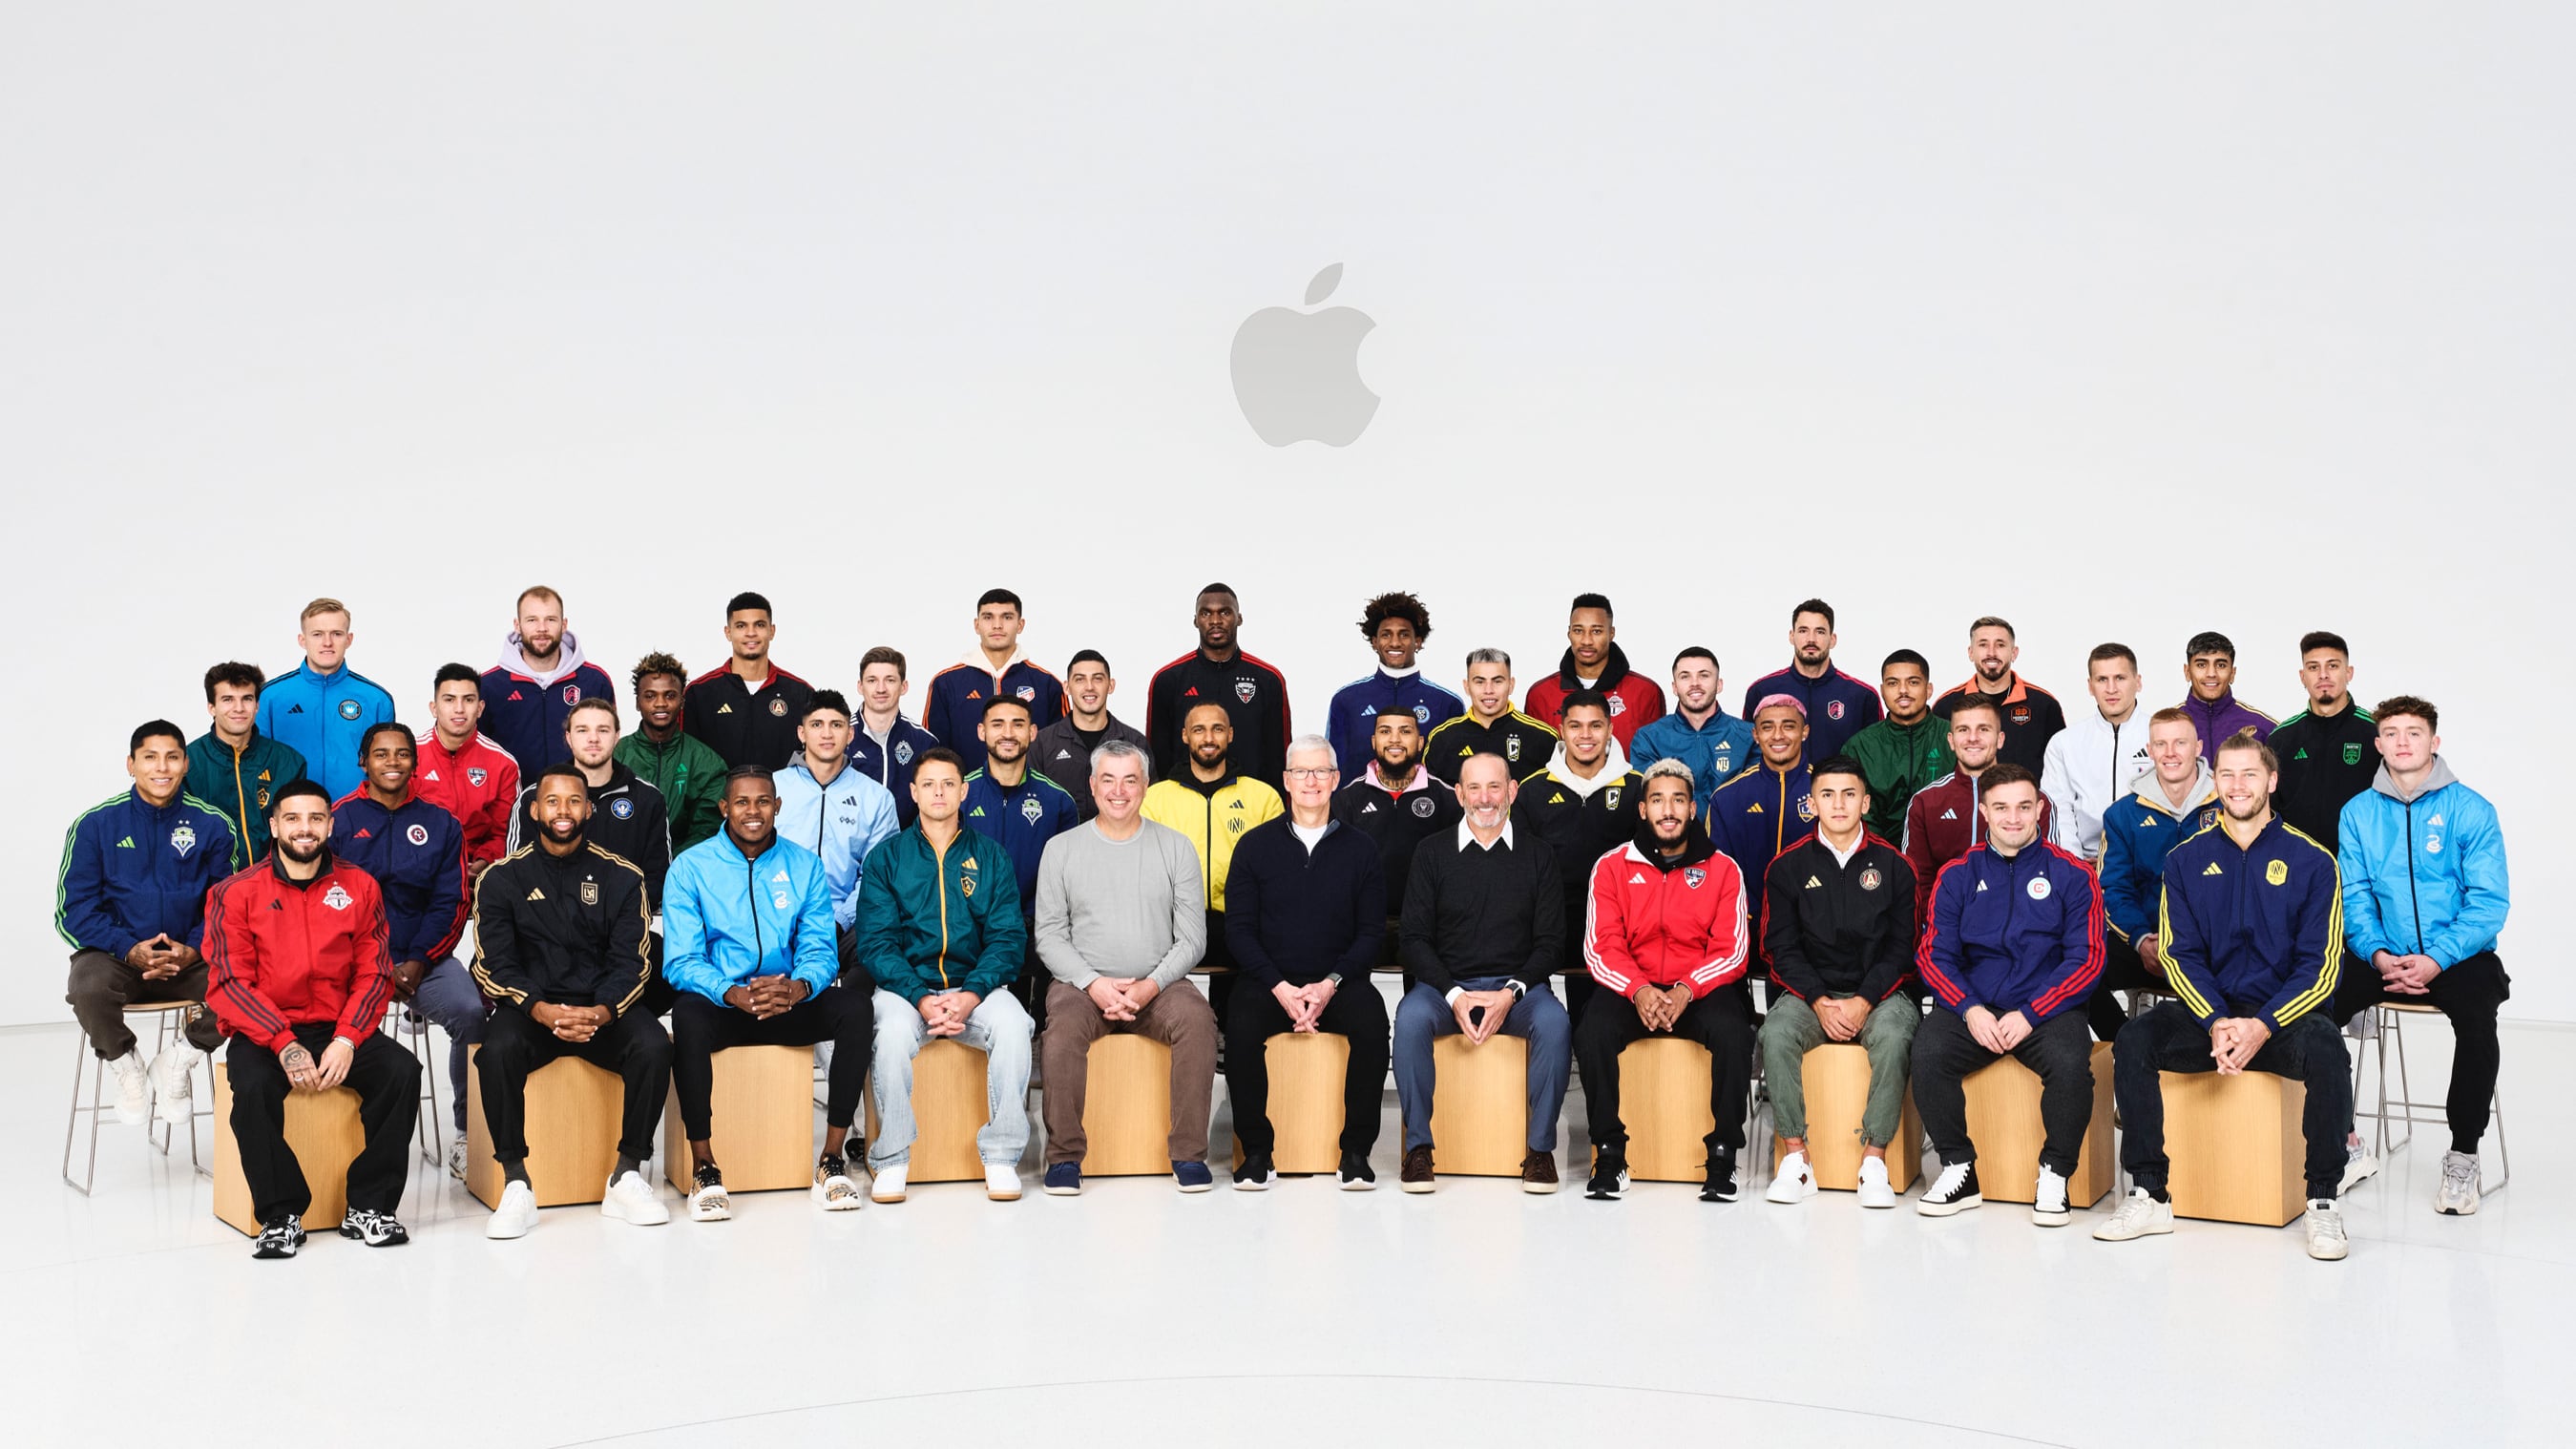 Group photo of Apple's Tim Cook and Eddy Cue with MLS players